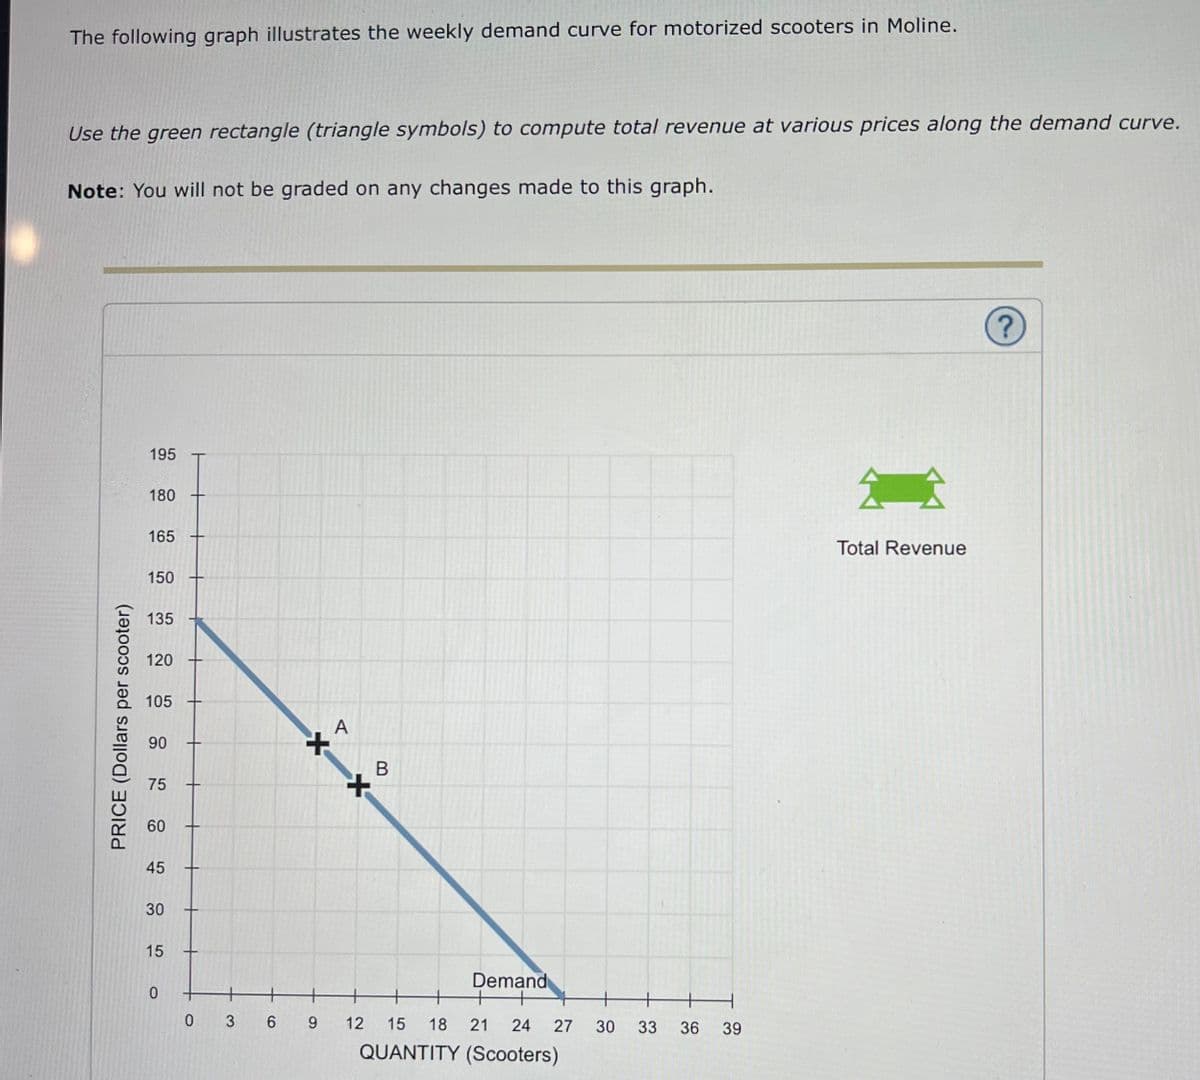 The following graph illustrates the weekly demand curve for motorized scooters in Moline.
Use the green rectangle (triangle symbols) to compute total revenue at various prices along the demand curve.
Note: You will not be graded on any changes made to this graph.
PRICE (Dollars per scooter)
195
180
165
150
135
120
105
90
75
60
45
30
15
0
+
+
0 3 6 9
A
B
Demand
++
12 15
18 21 24 27 30
QUANTITY (Scooters)
33 36
39
22
Total Revenue
?